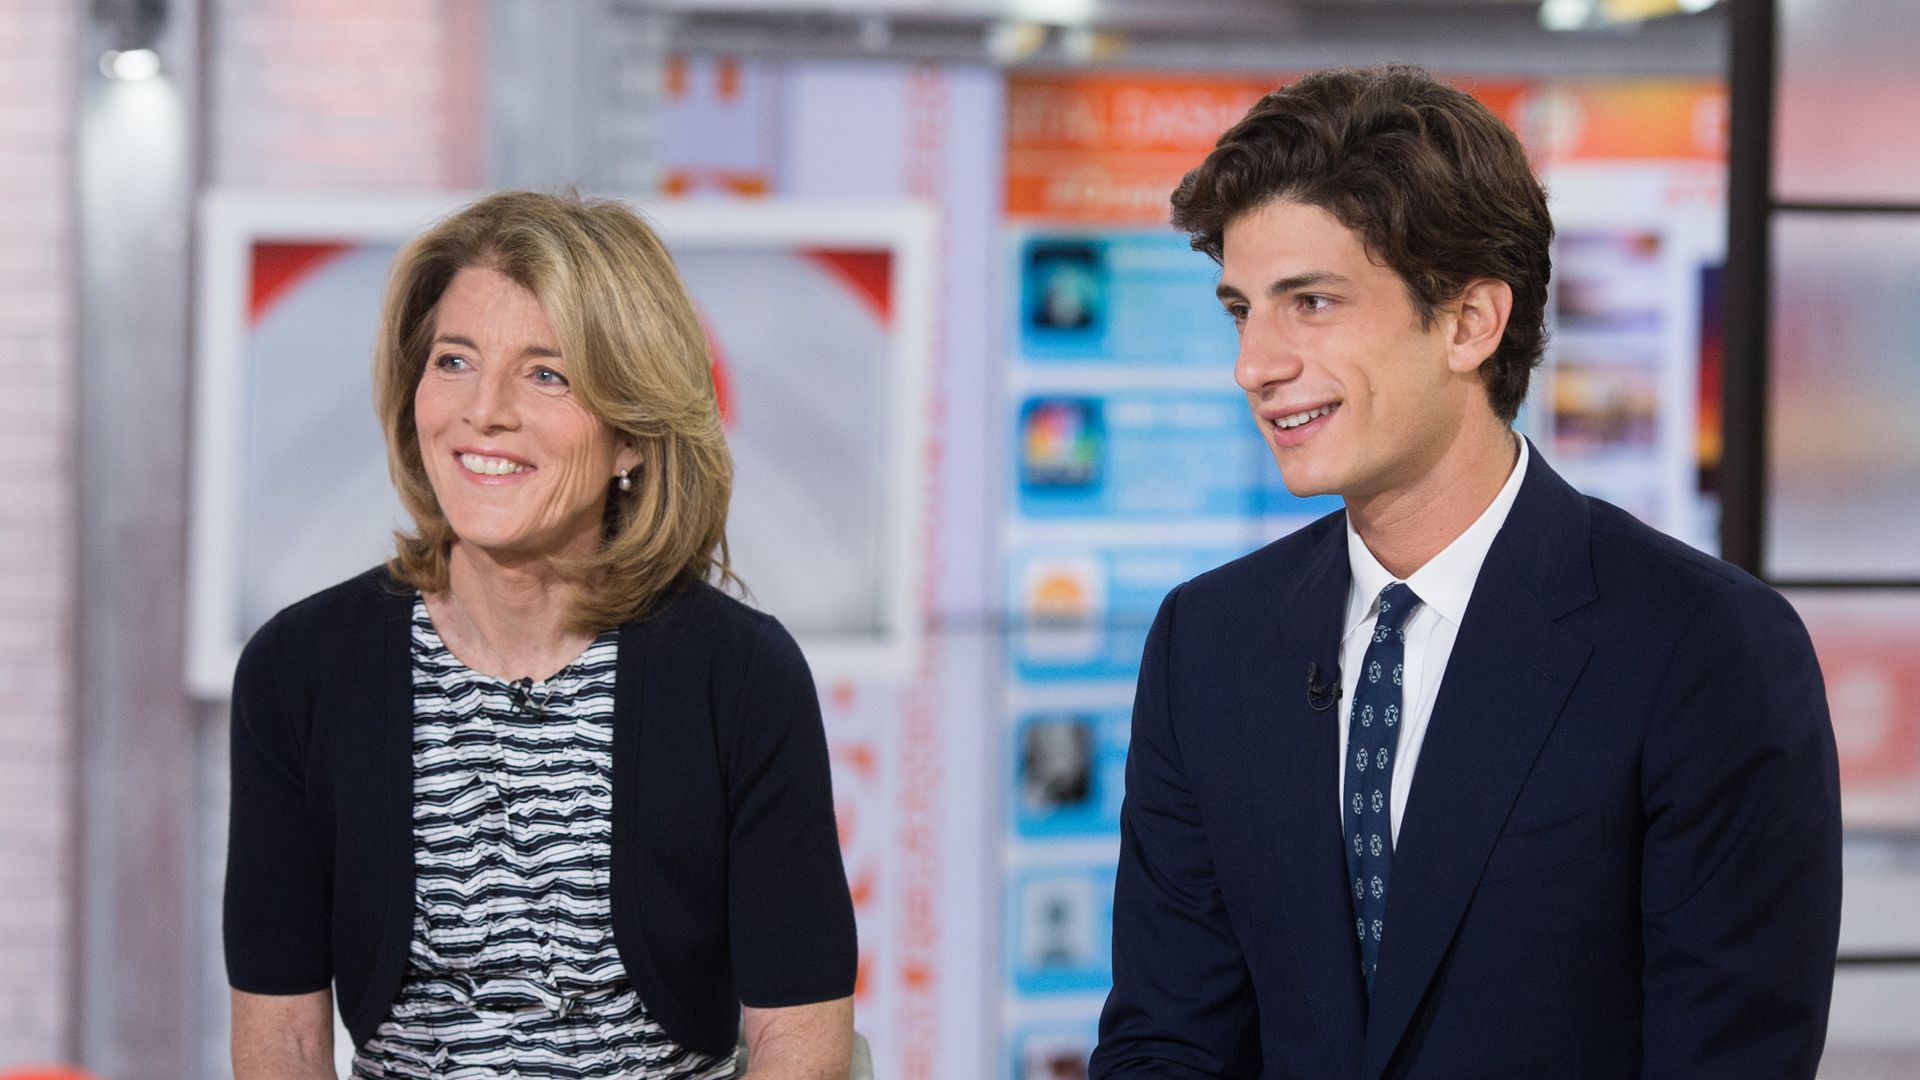 TODAY -- Pictured: Caroline Kennedy and Jack Schlossberg on Friday, May 5, 2017